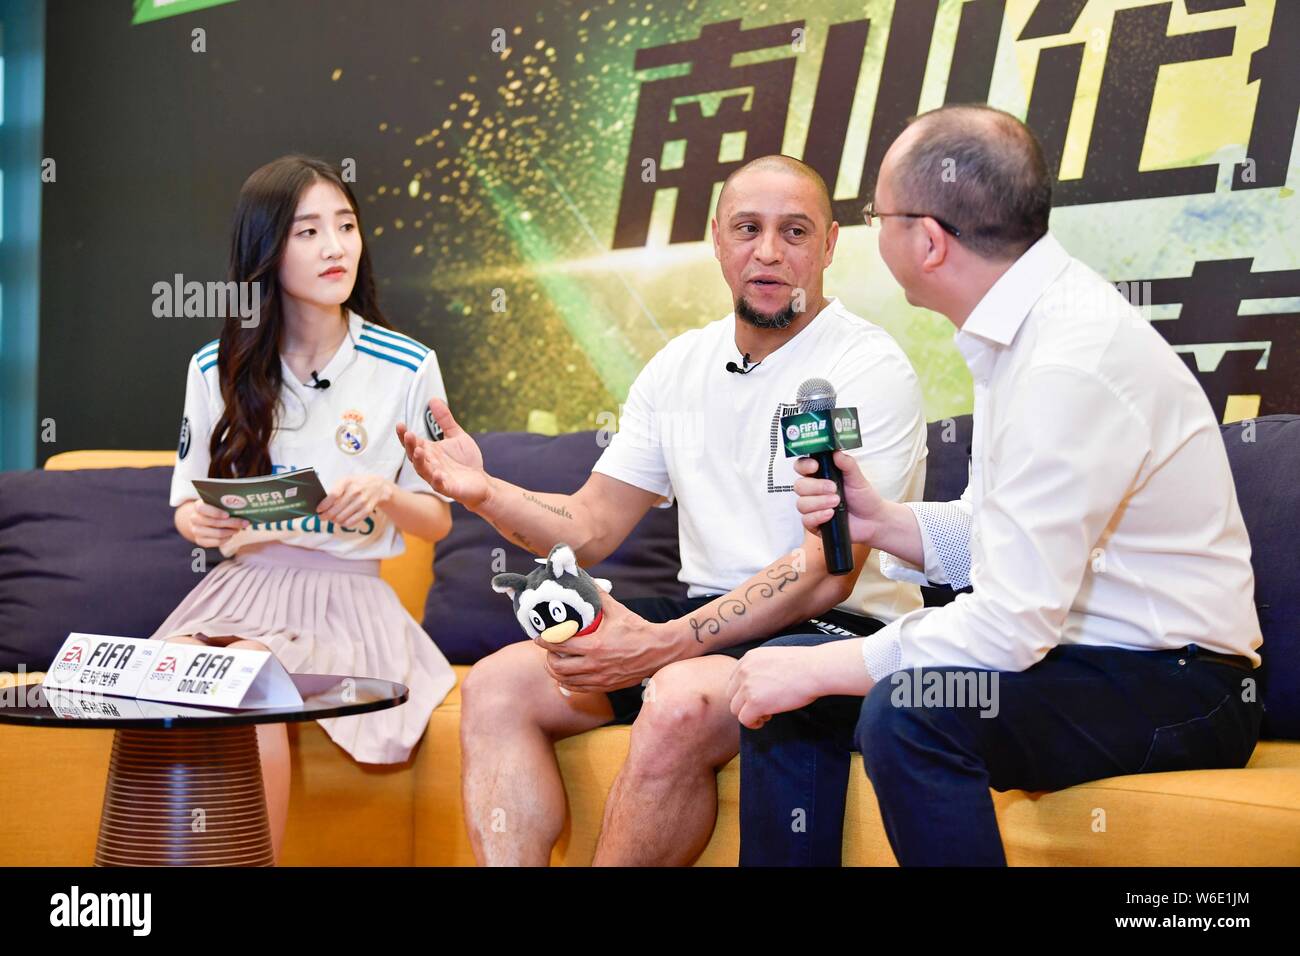 Former Brazilian football player Roberto Carlos plays the interactive question and answer during his China tour 2018 event at the Tencent Kexing Scien Stock Photo